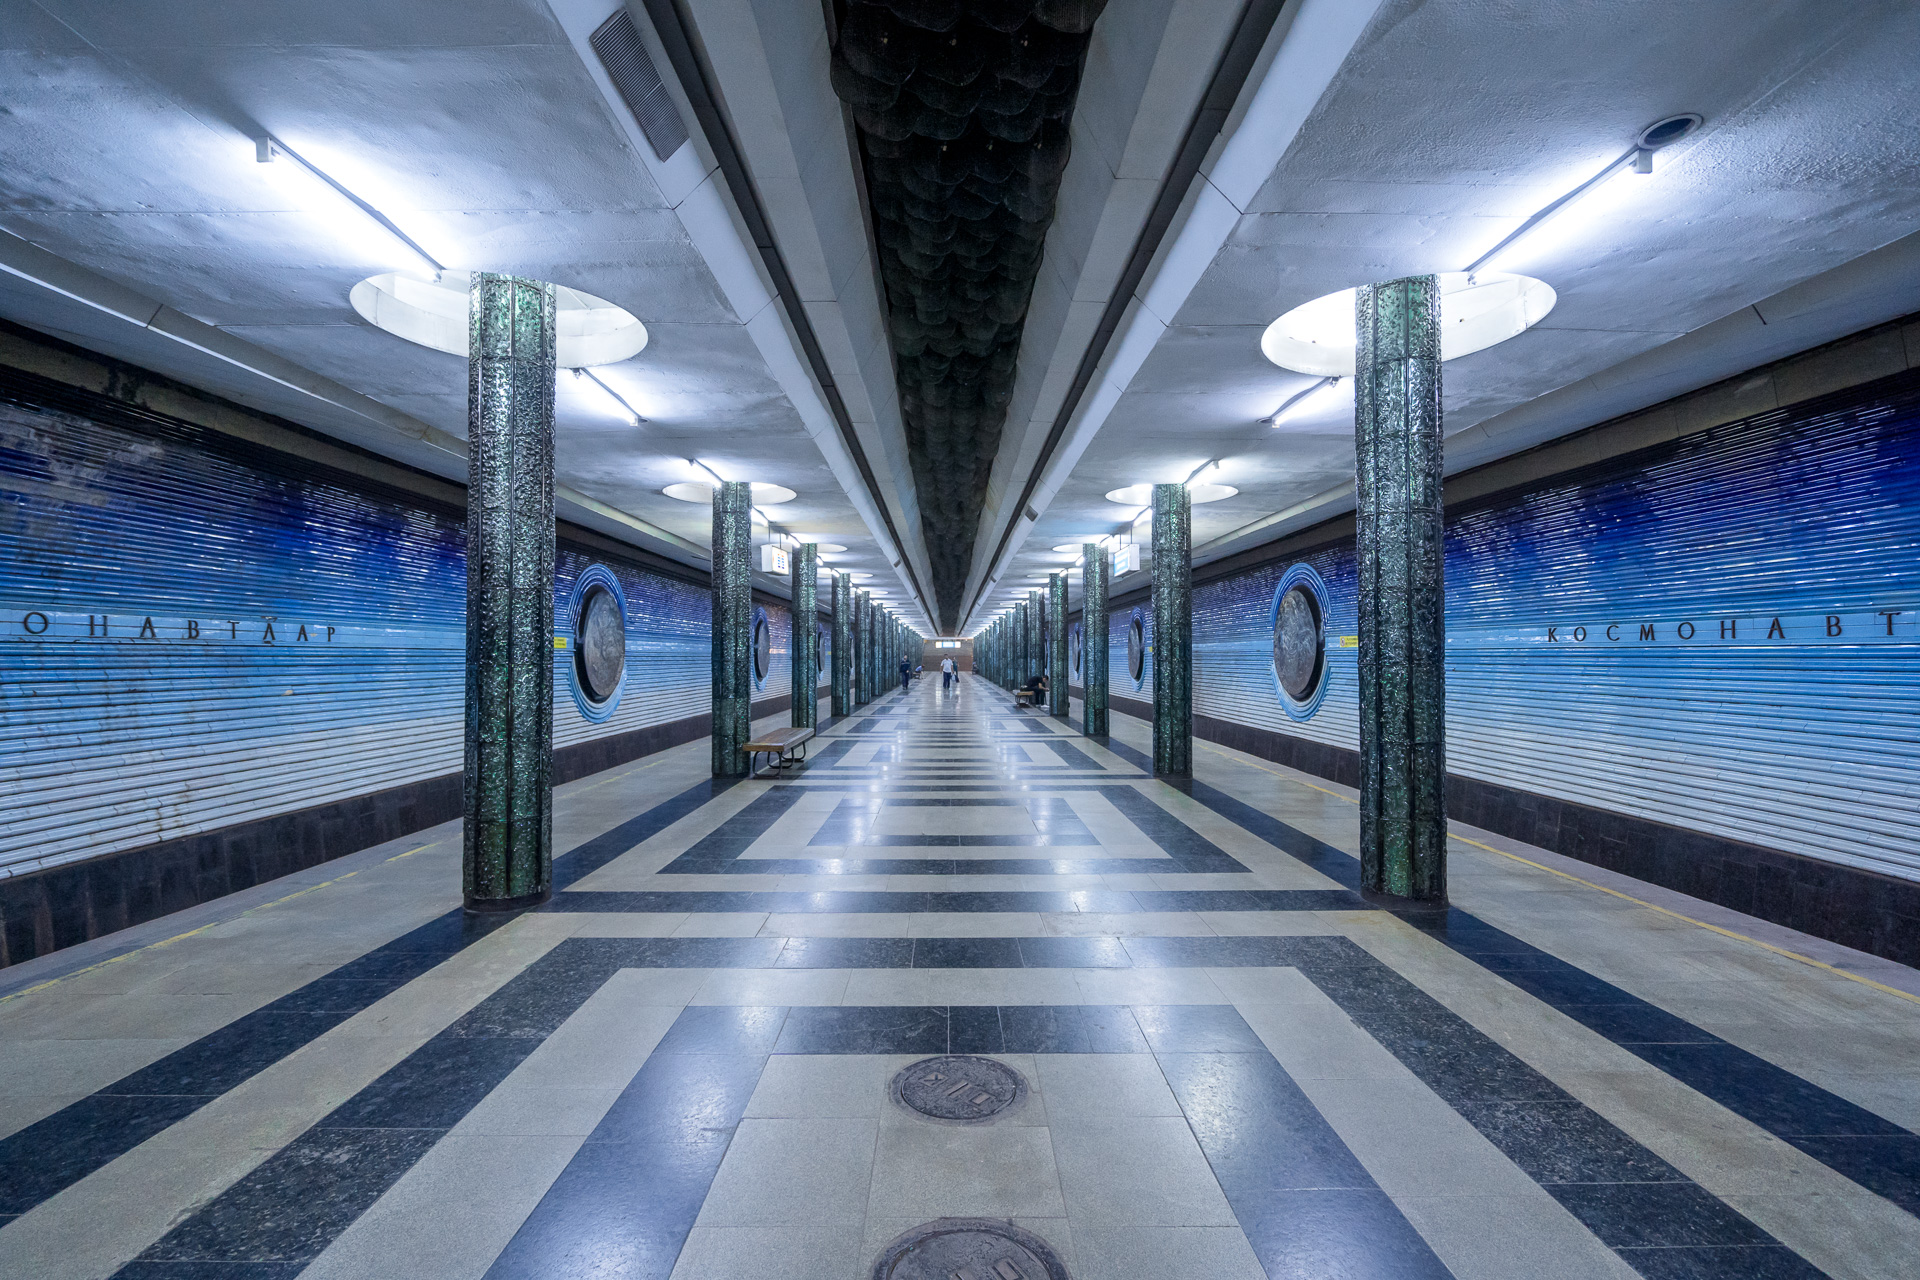 Elaborate Underground Architecture of Soviet Metro Stations Photographed by Christopher Herwig